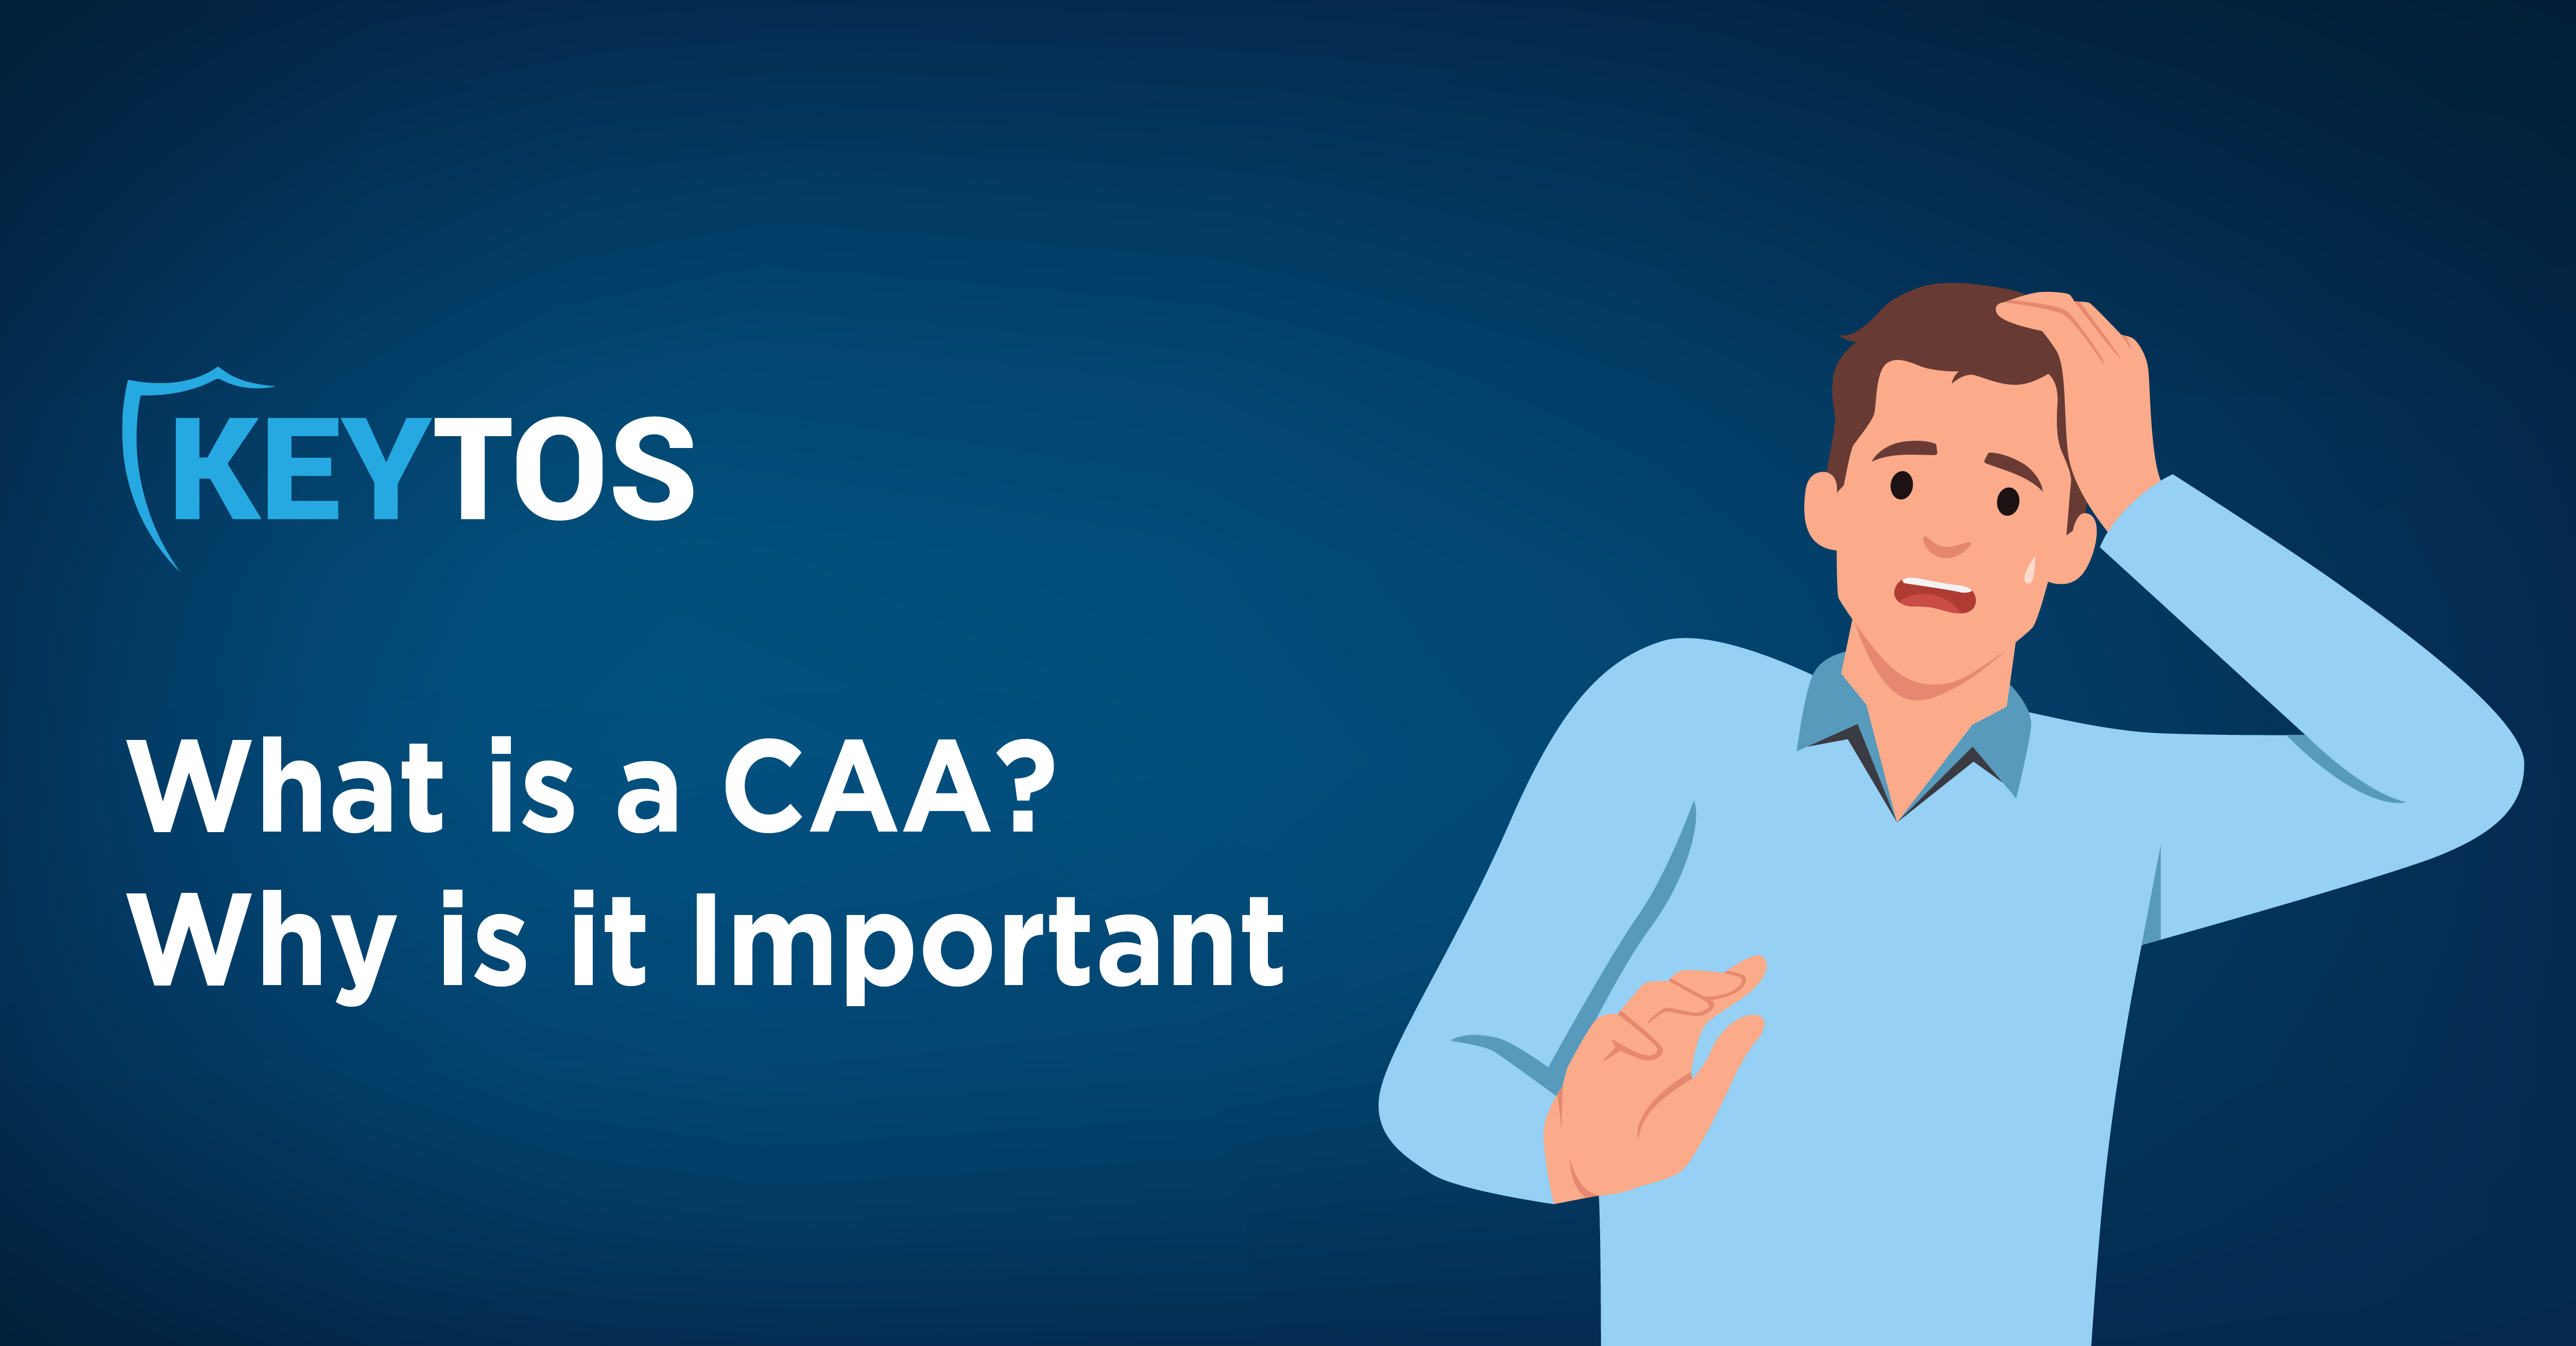 What is a CAA?